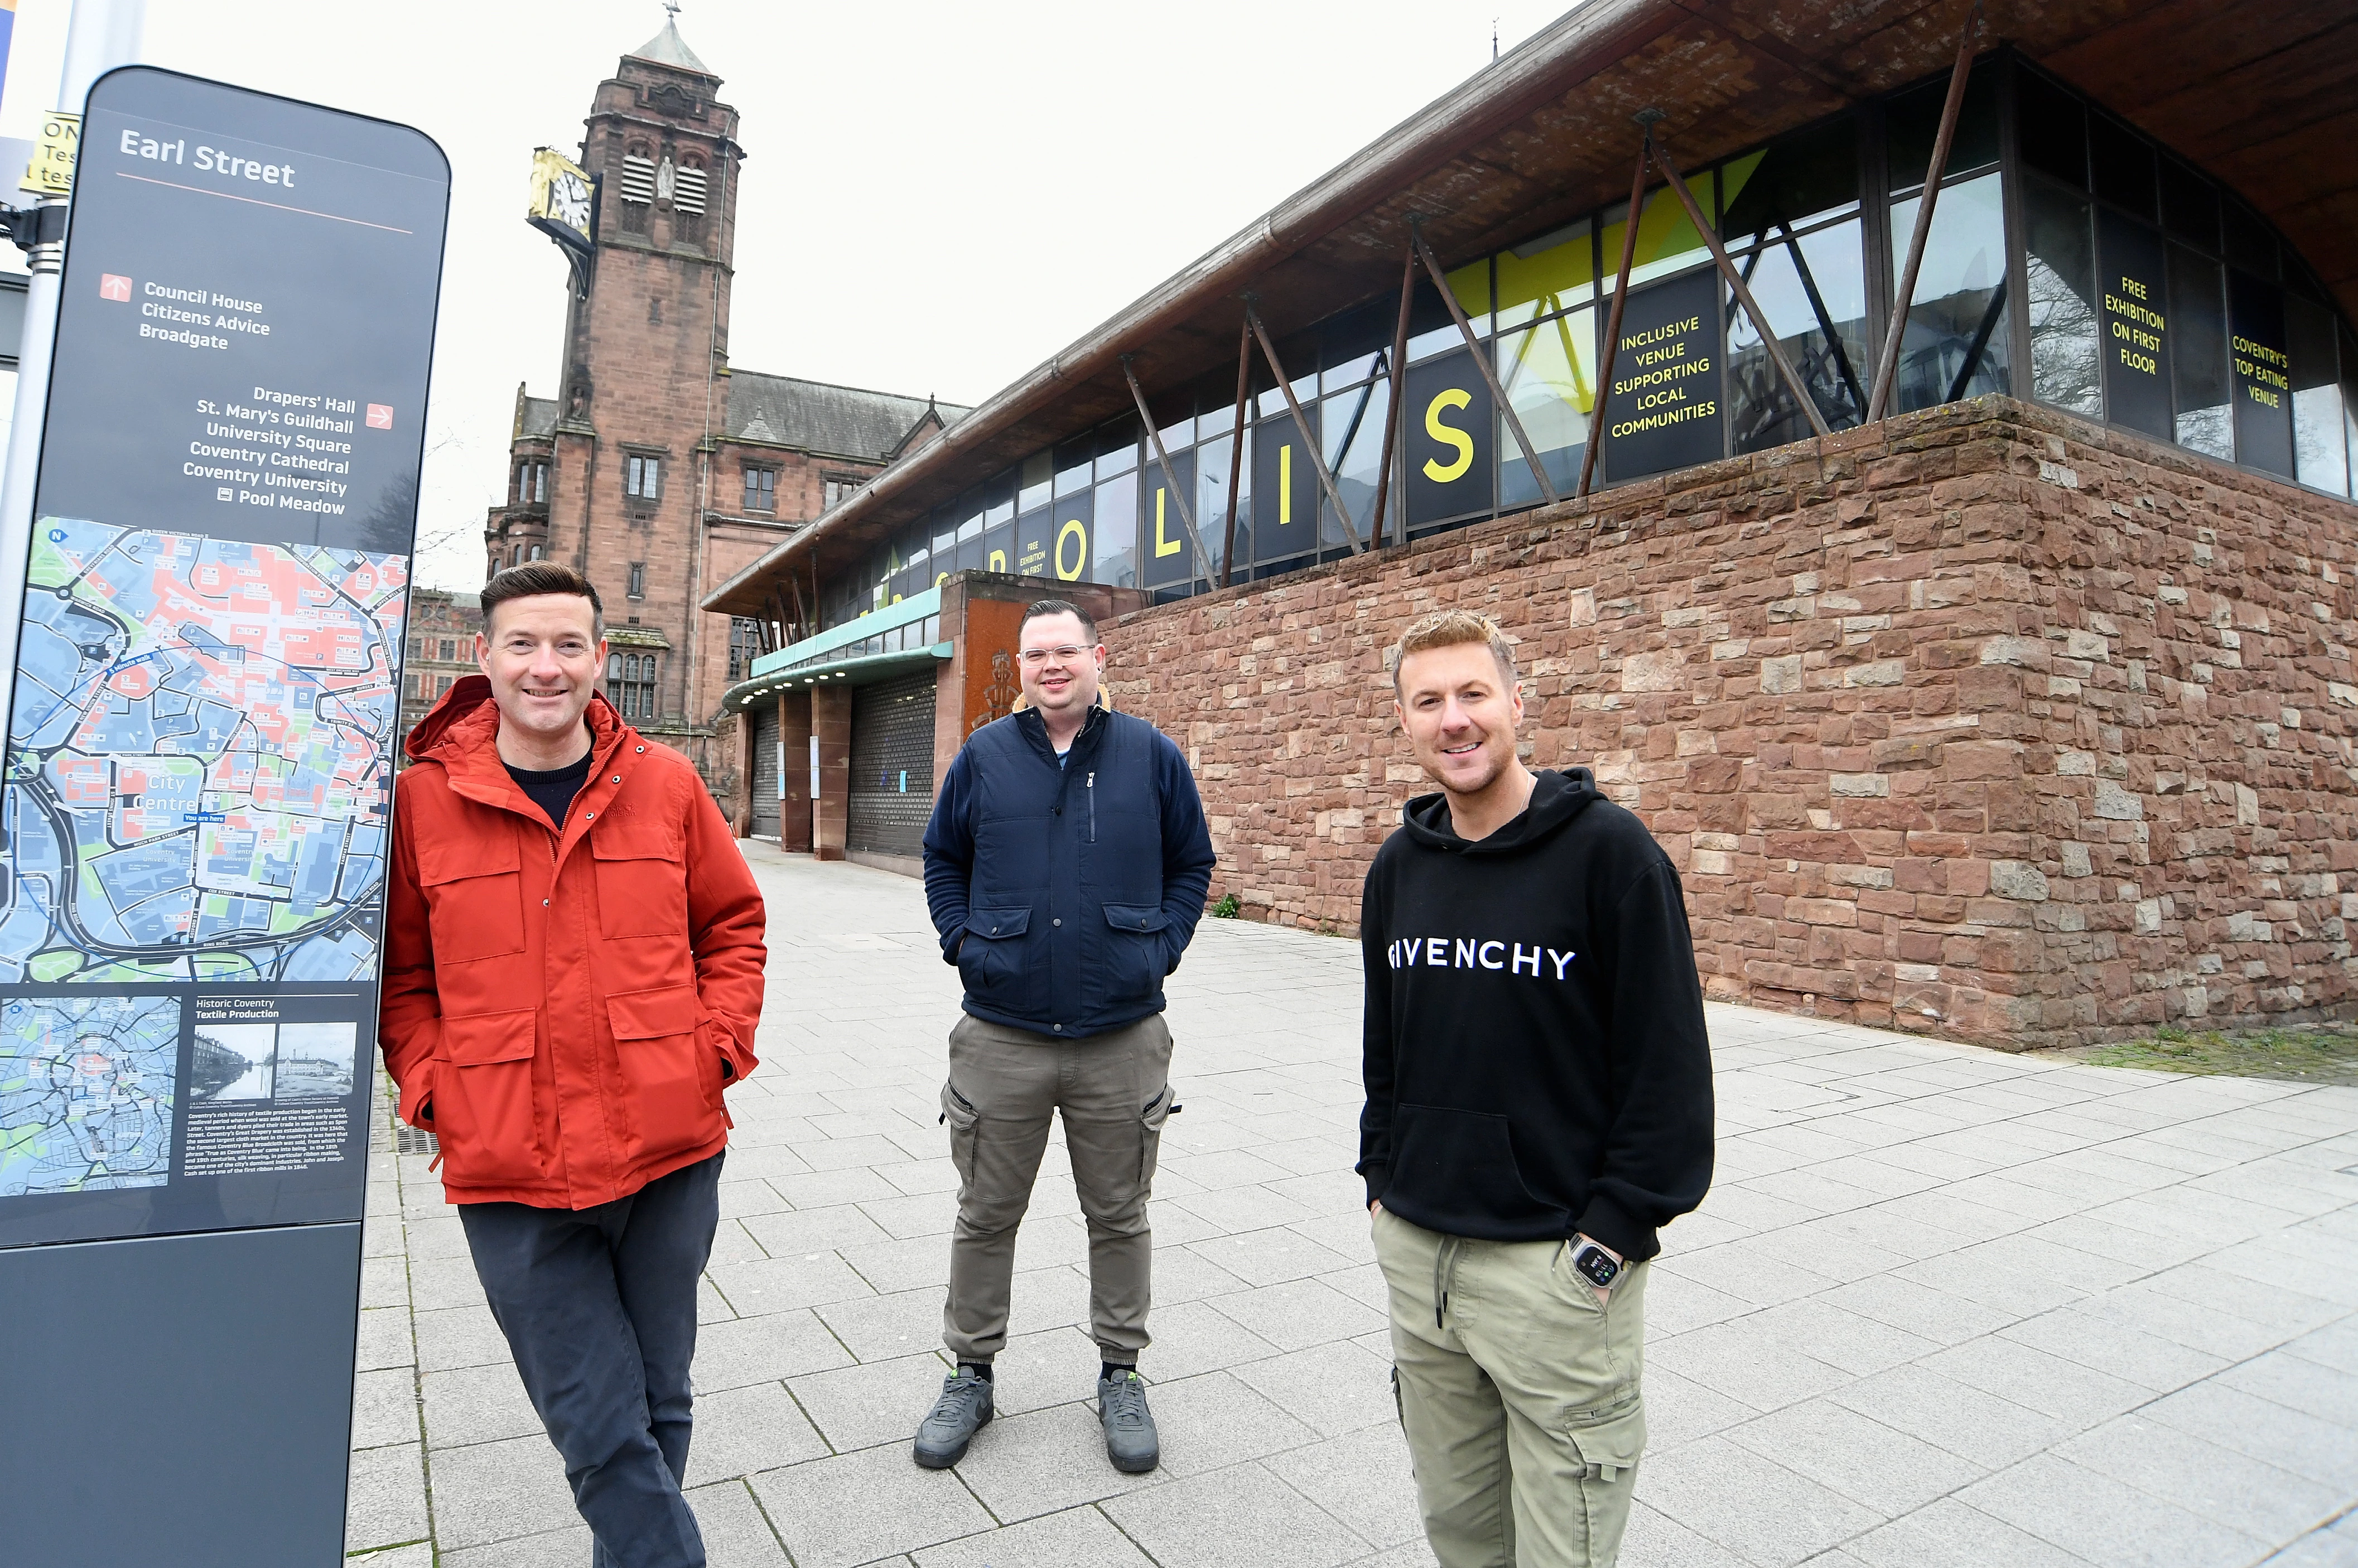 From left: Richard Easter with Kieran Jones and John Dalziel of The Yard outside the new venue on Earl Street